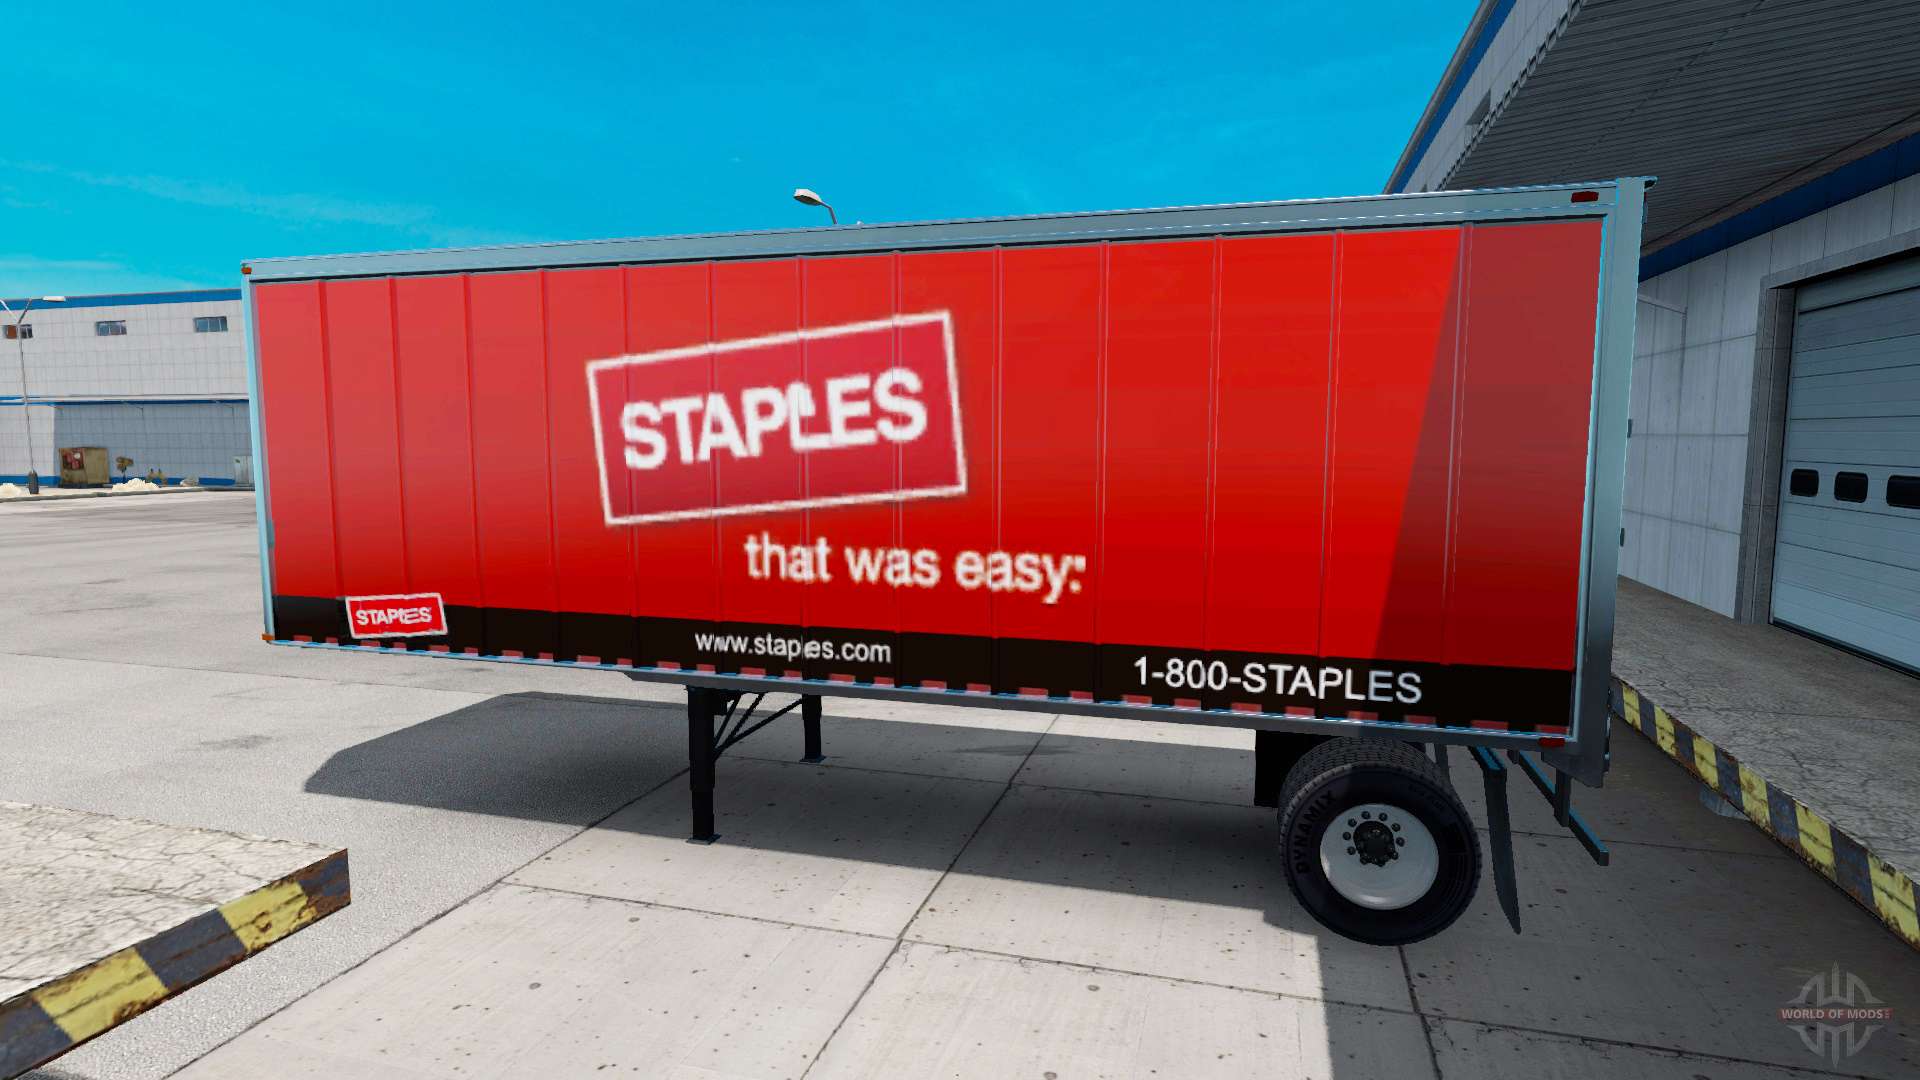 Image result for Staples that was easy truck